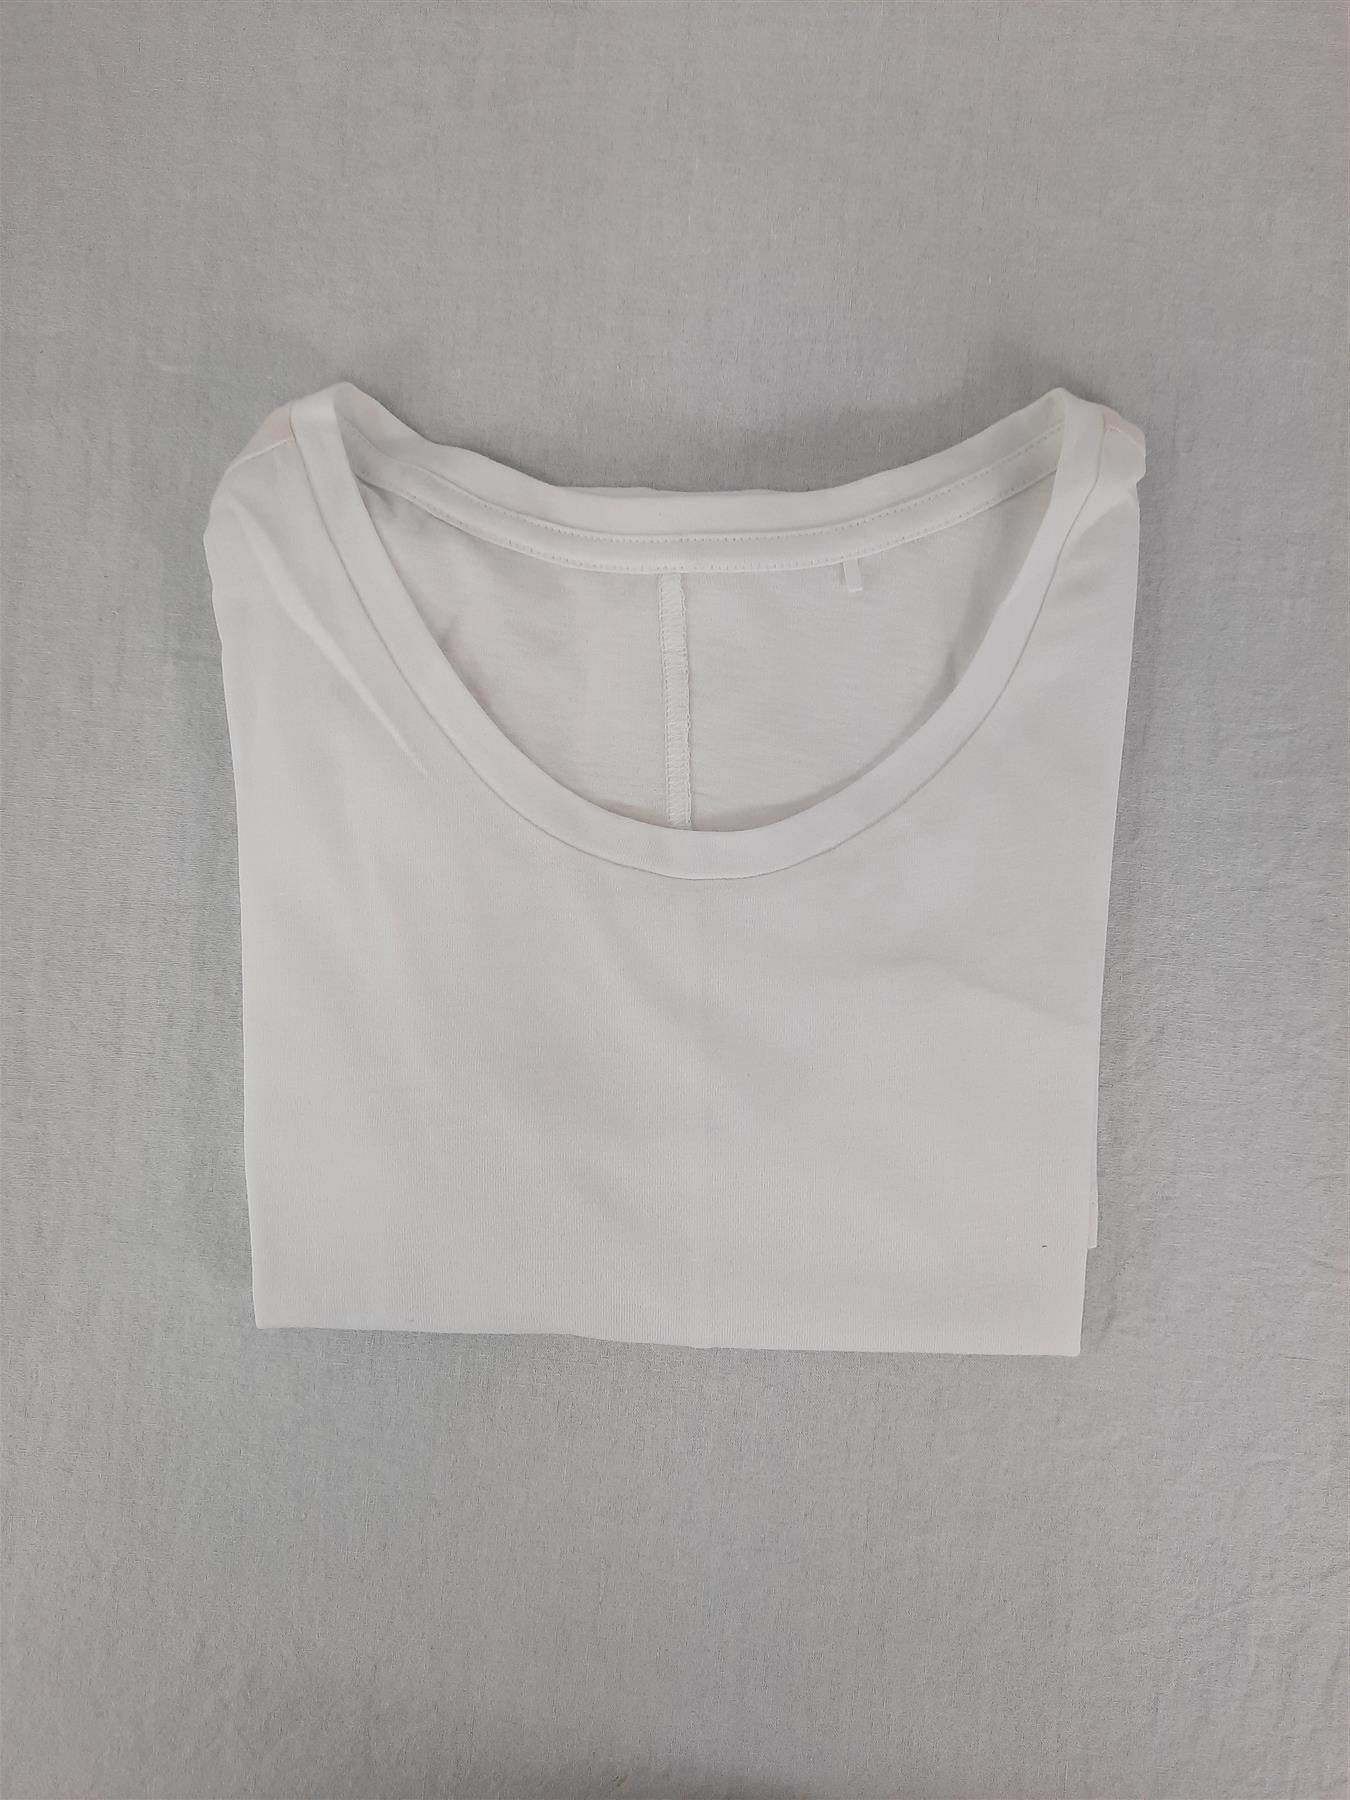 Women's Pure Cotton T-Shirt Tee Top Summer Lightweight Breathable Relaxed Fit Brand New